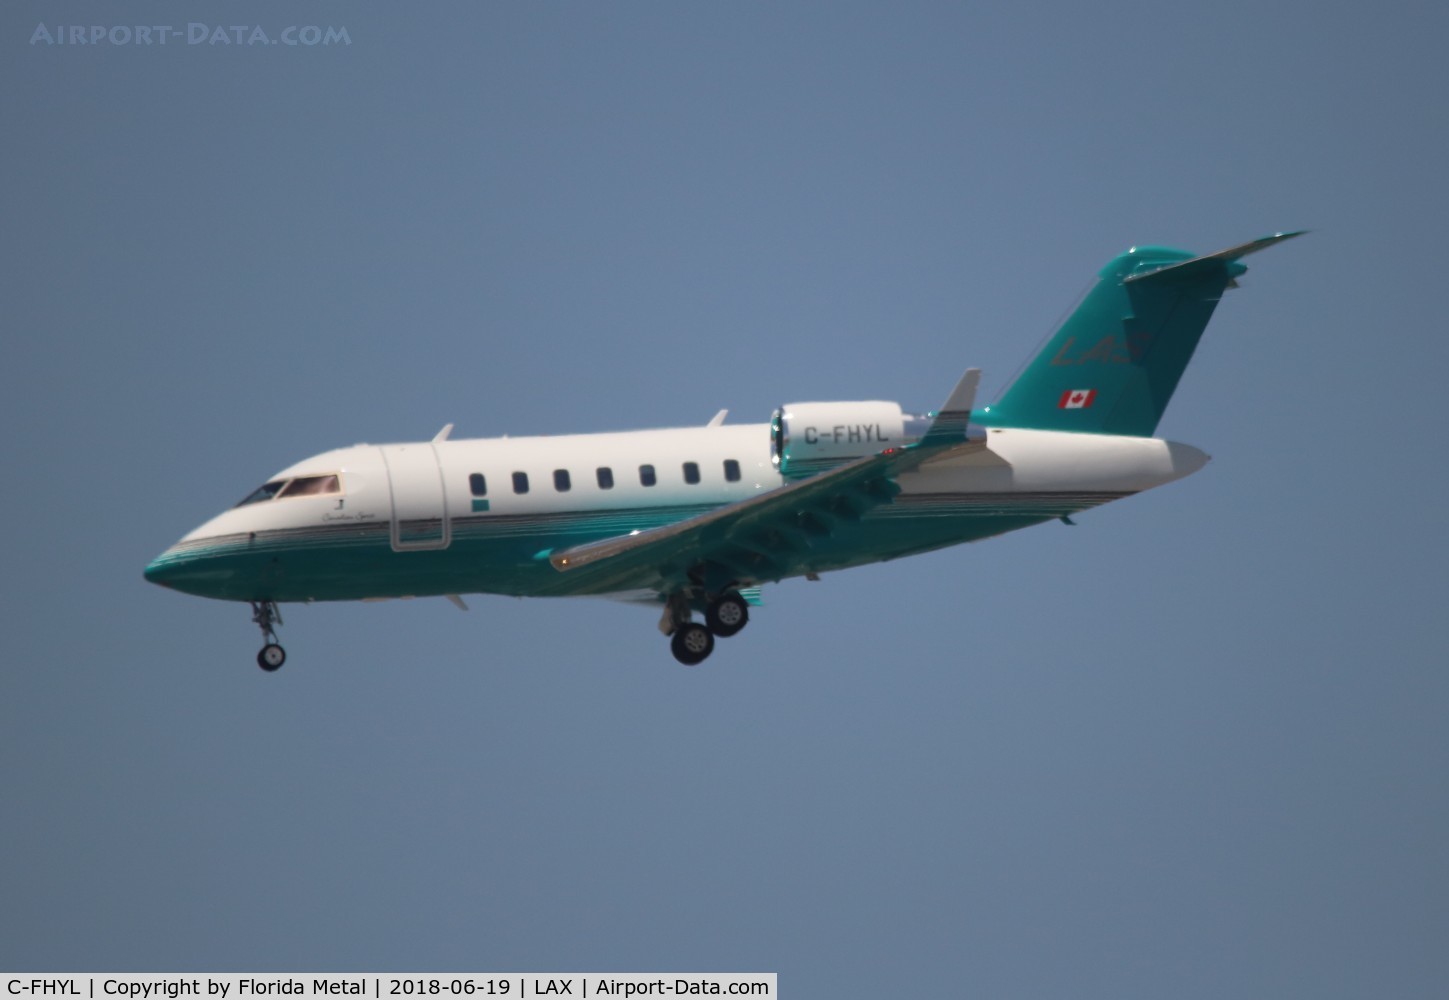 C-FHYL, 2001 Bombardier Challenger 604 (CL-600-2B16) C/N 5506, Challenger 604